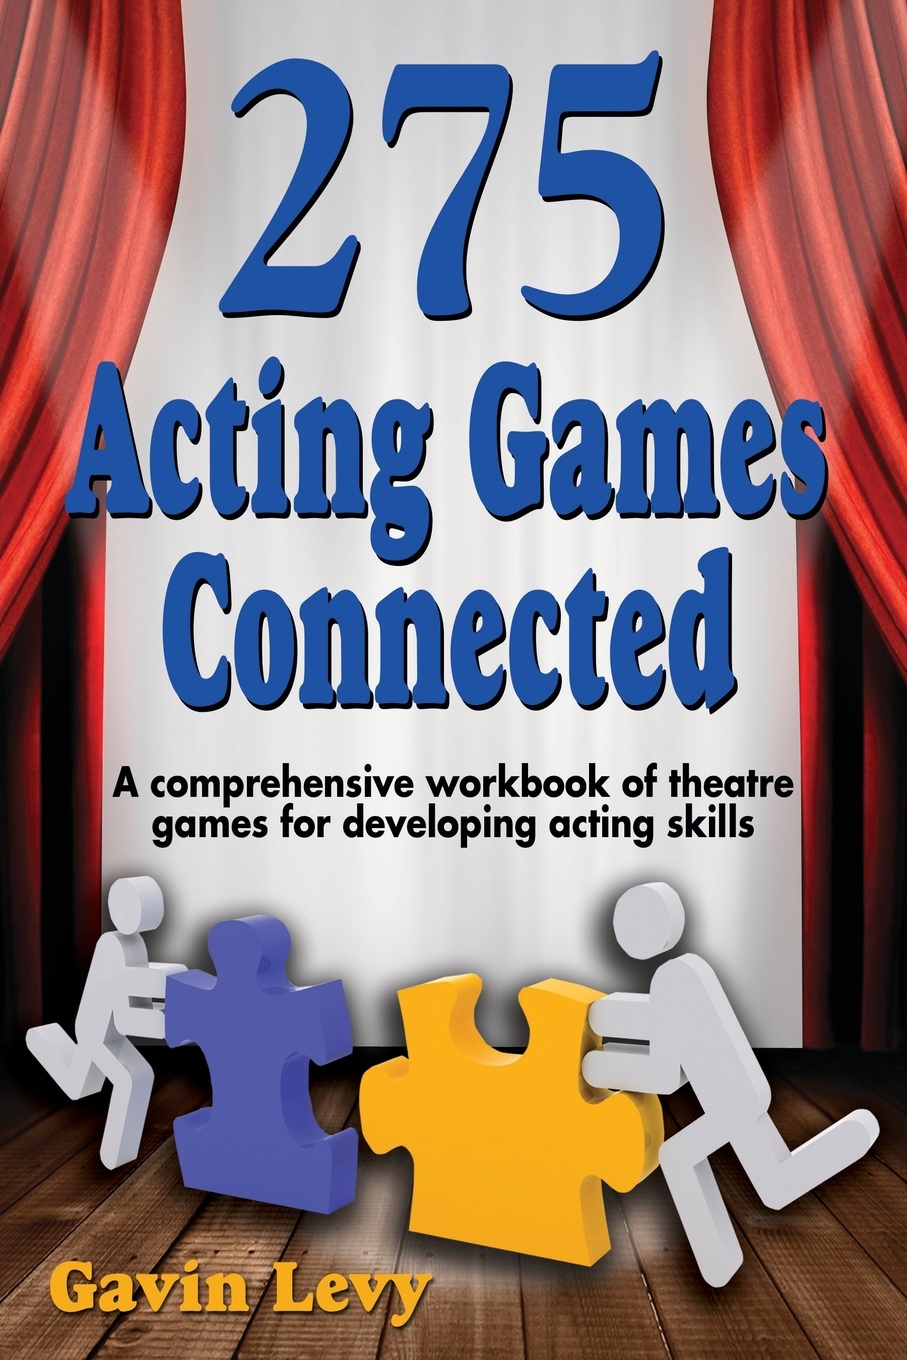 275 Acting Games! Connected. A Comprehensive Workbook of Theatre Games for Developing Acting Skills